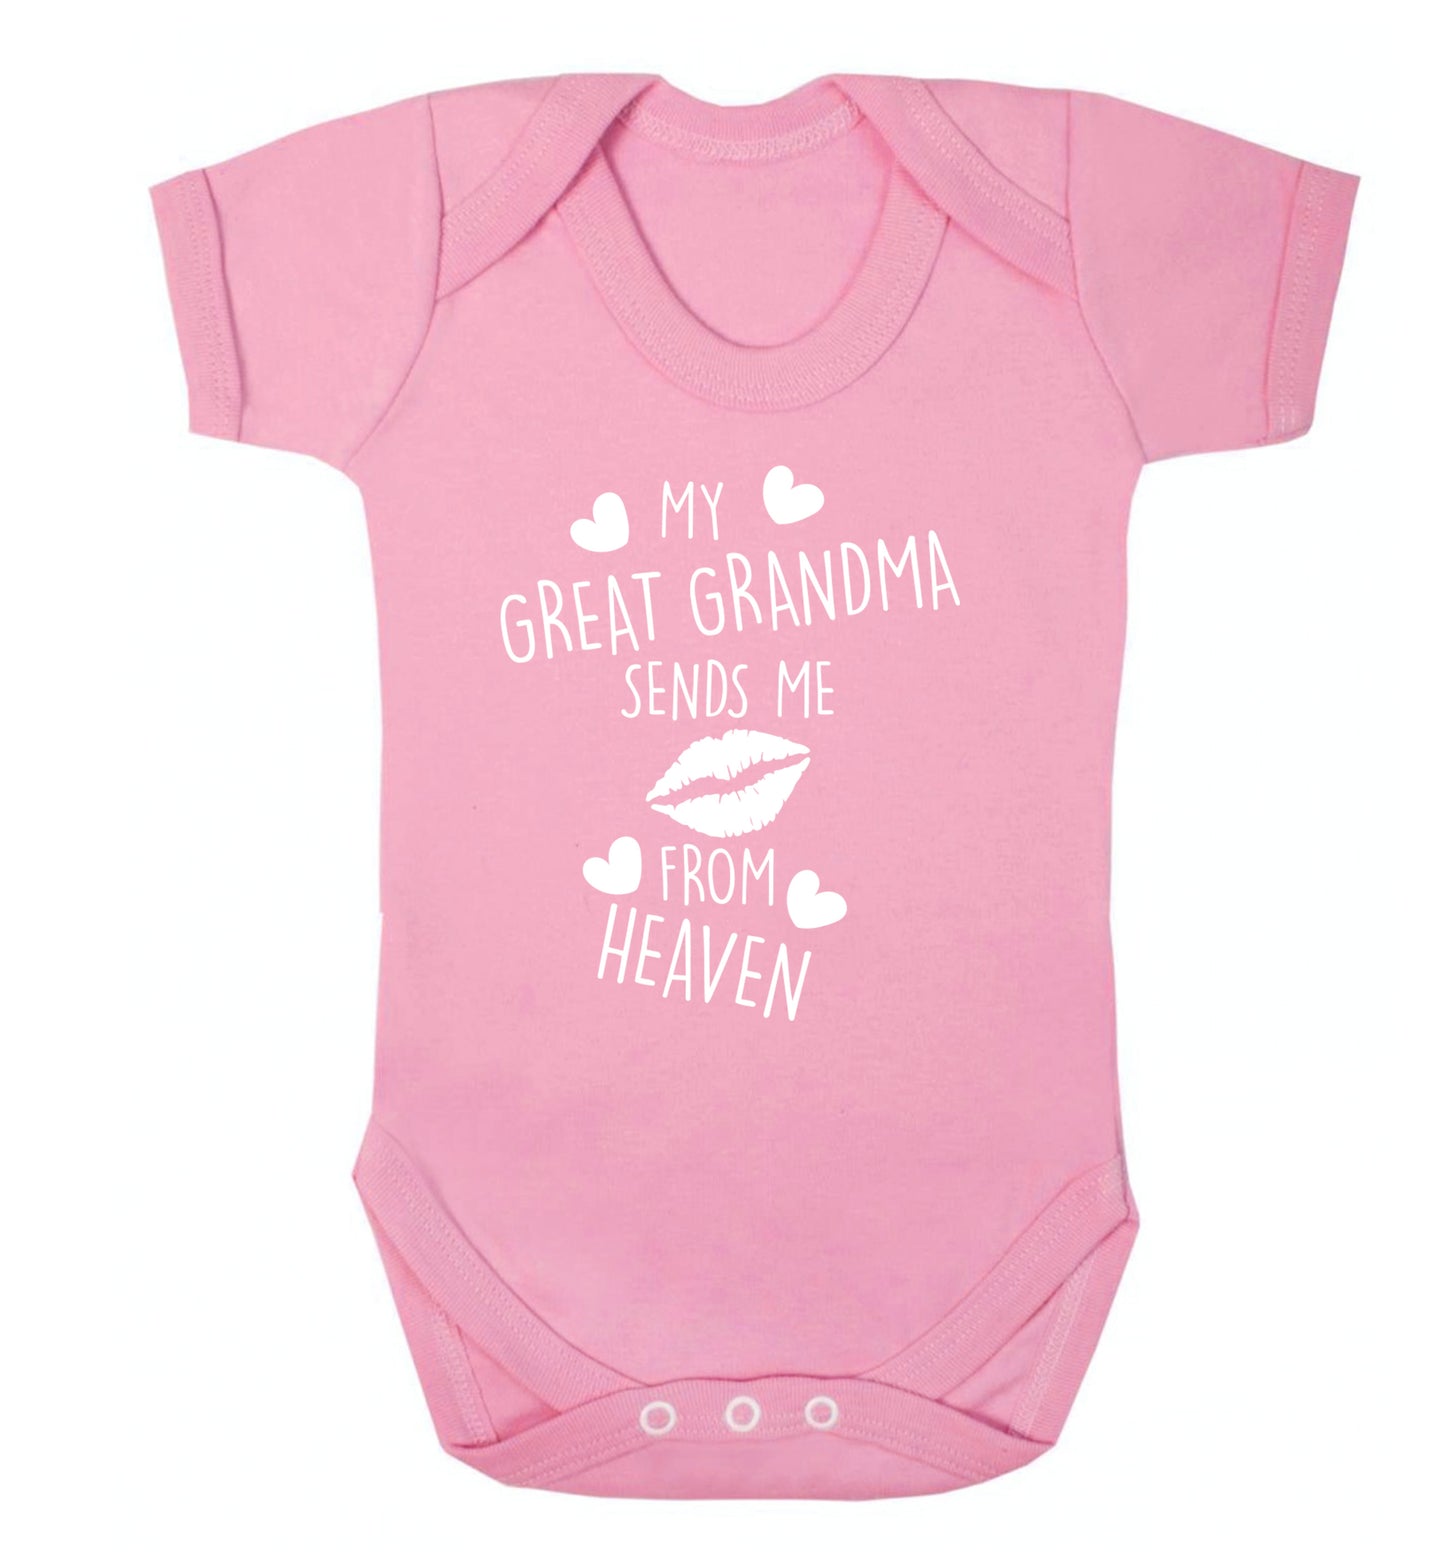 My great grandma sends me kisses from heaven Baby Vest pale pink 18-24 months